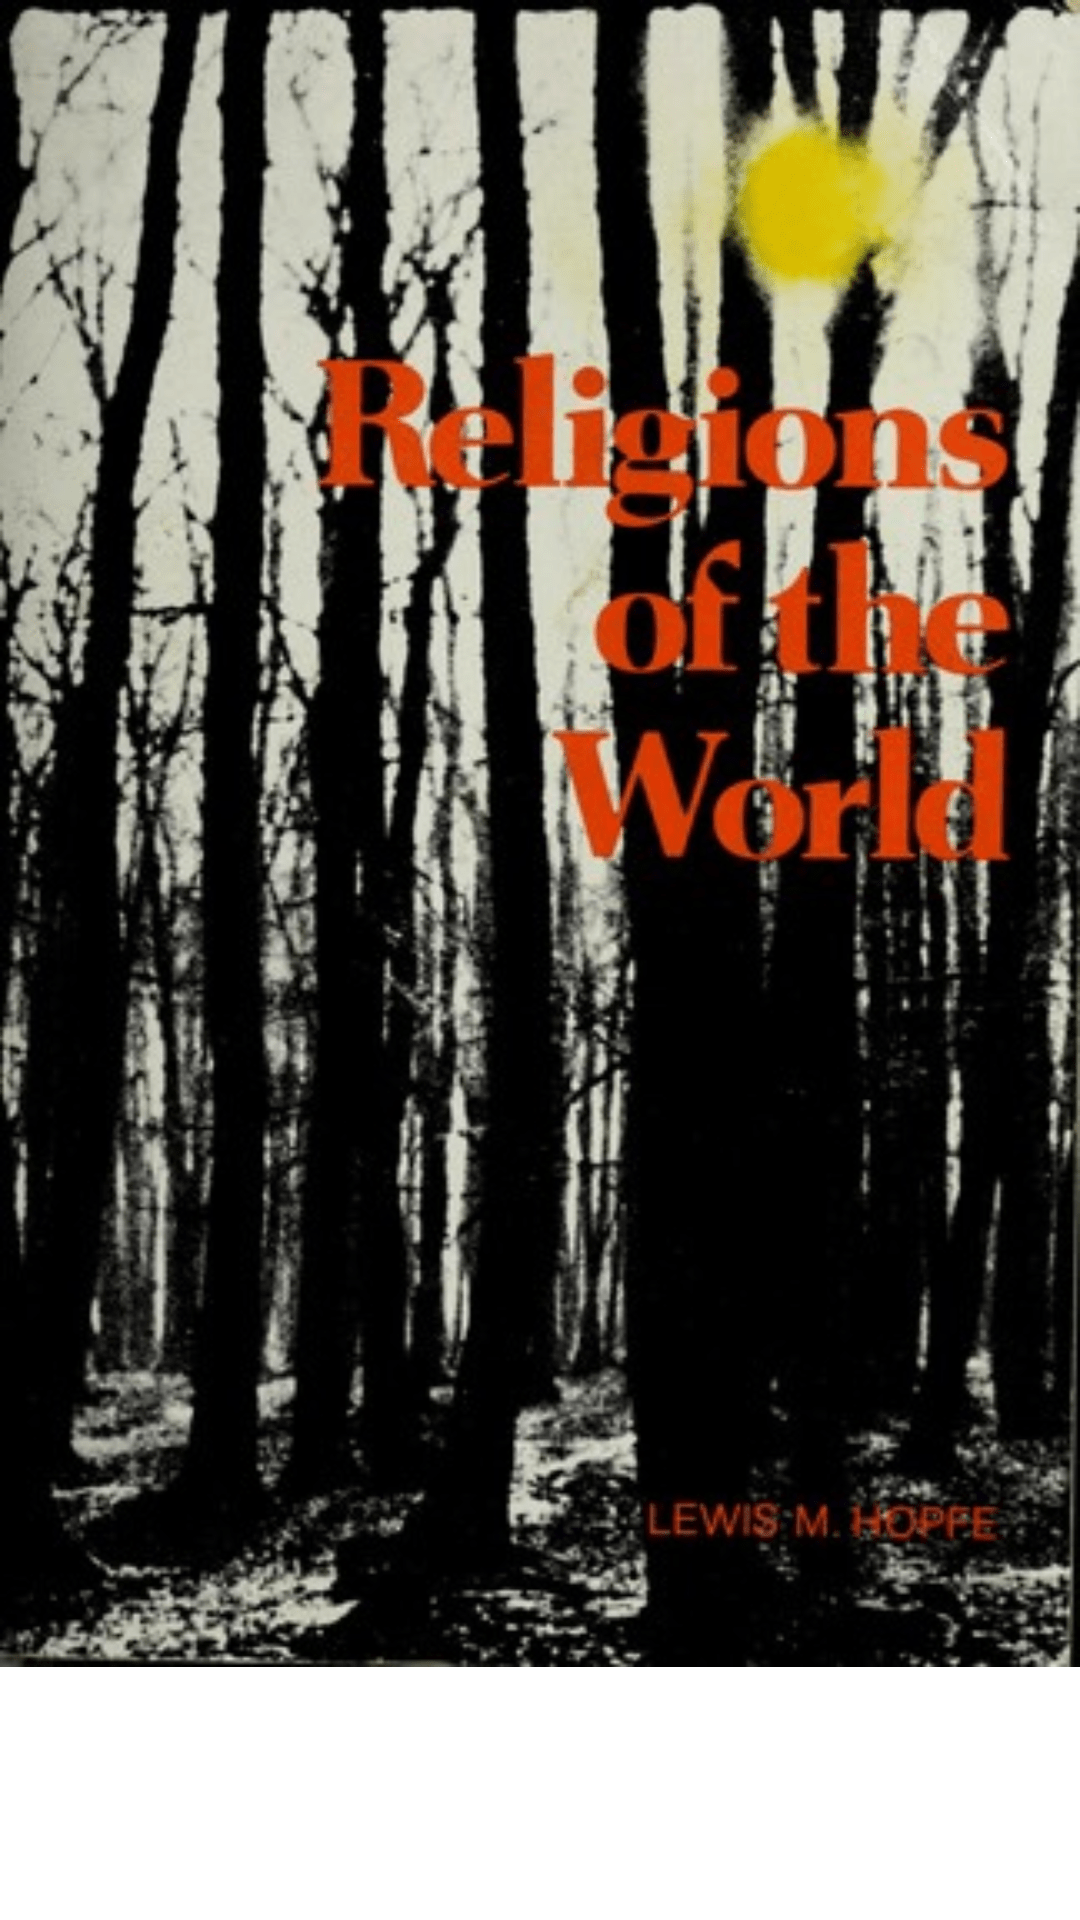 Religions of the World by Lewis M. Hopfe